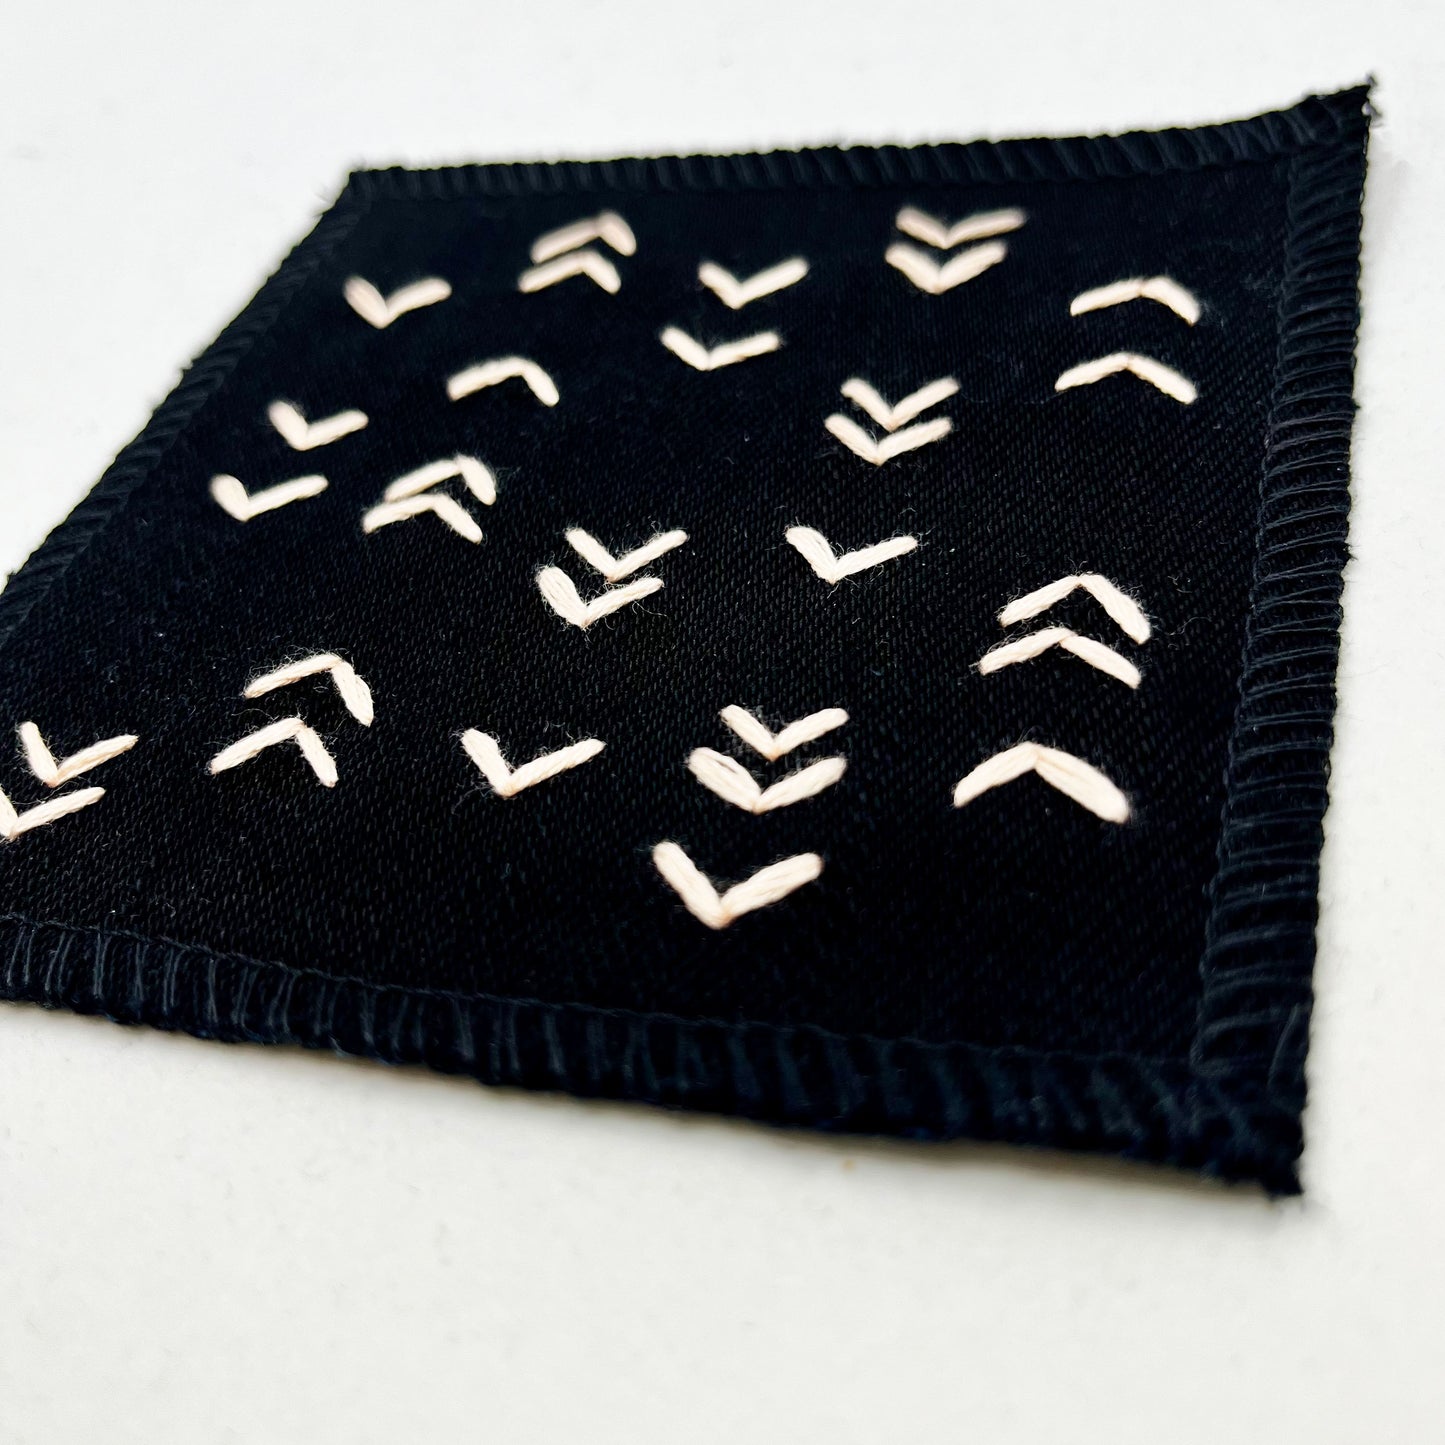 close up angled view of a square black denim patch hand stitched in peach with rows of unevenly spaced small chevrons facing different directions on a white background